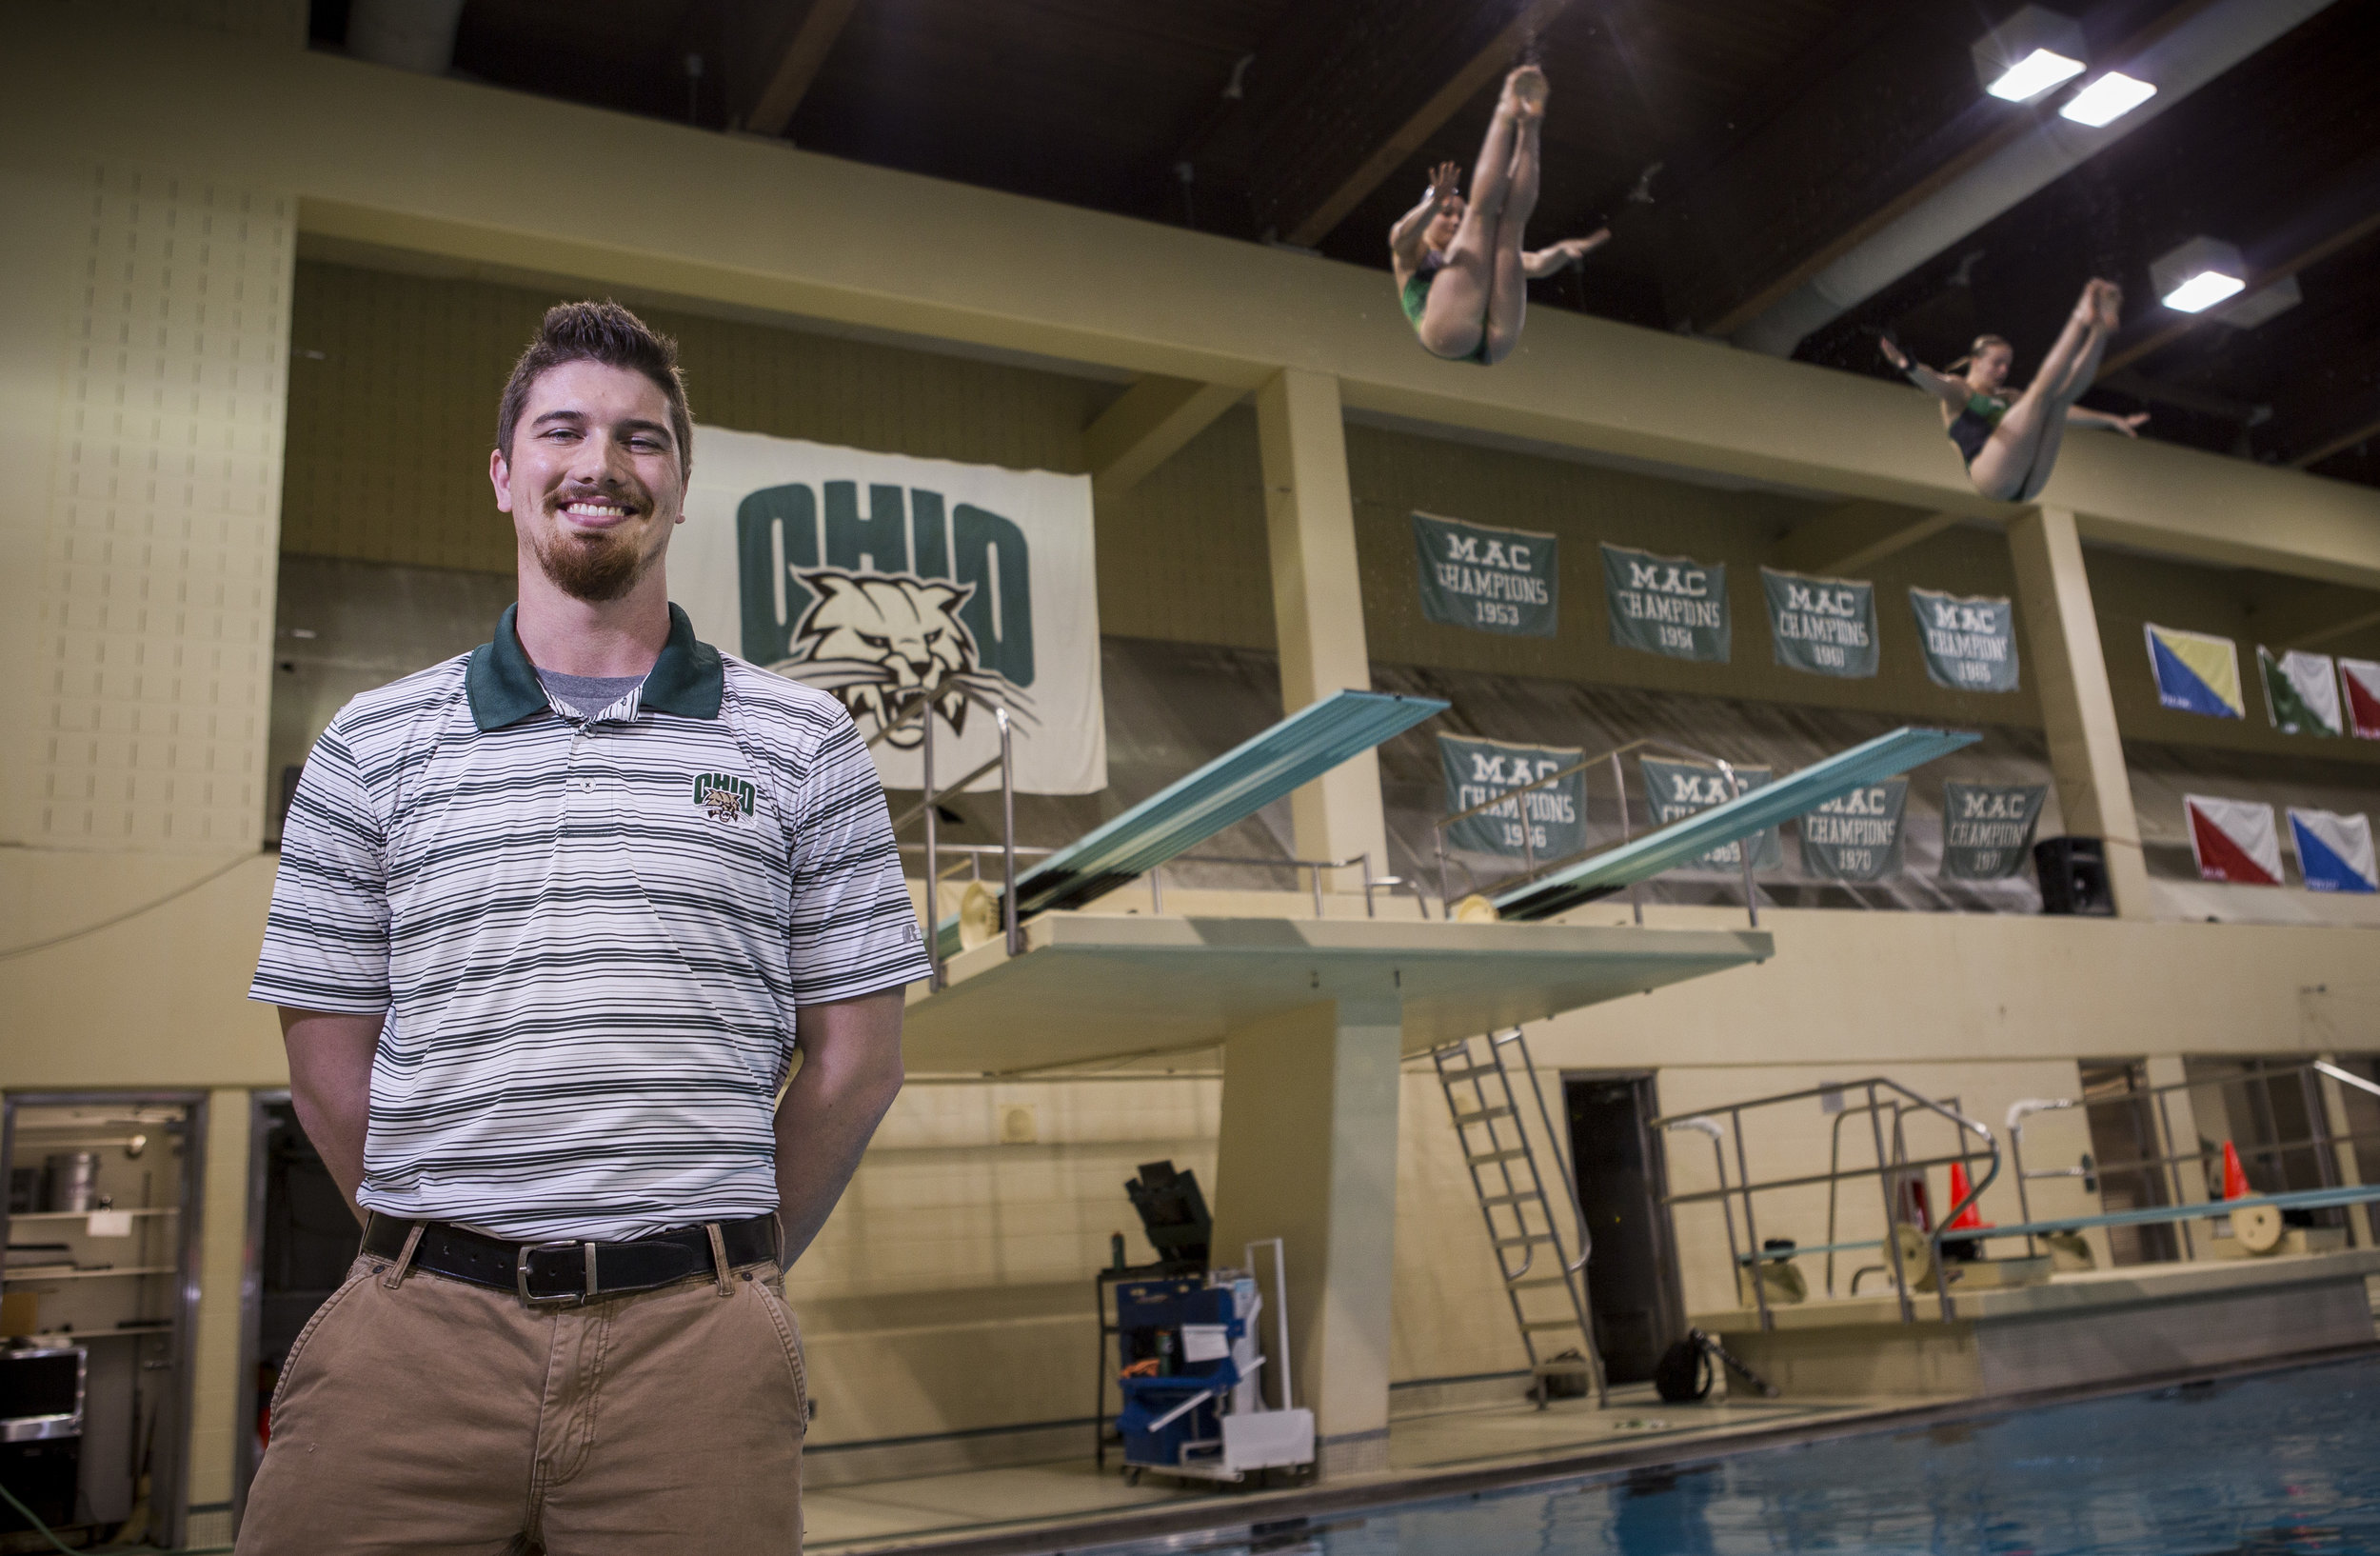  Tom Gimm, the new head diving coach, stands for a portrait as Ireland Littlejohn and Olivia Dillon dive in the background at the Ohio University Aquatic Center on Thursday, Jan. 26, 2017. 